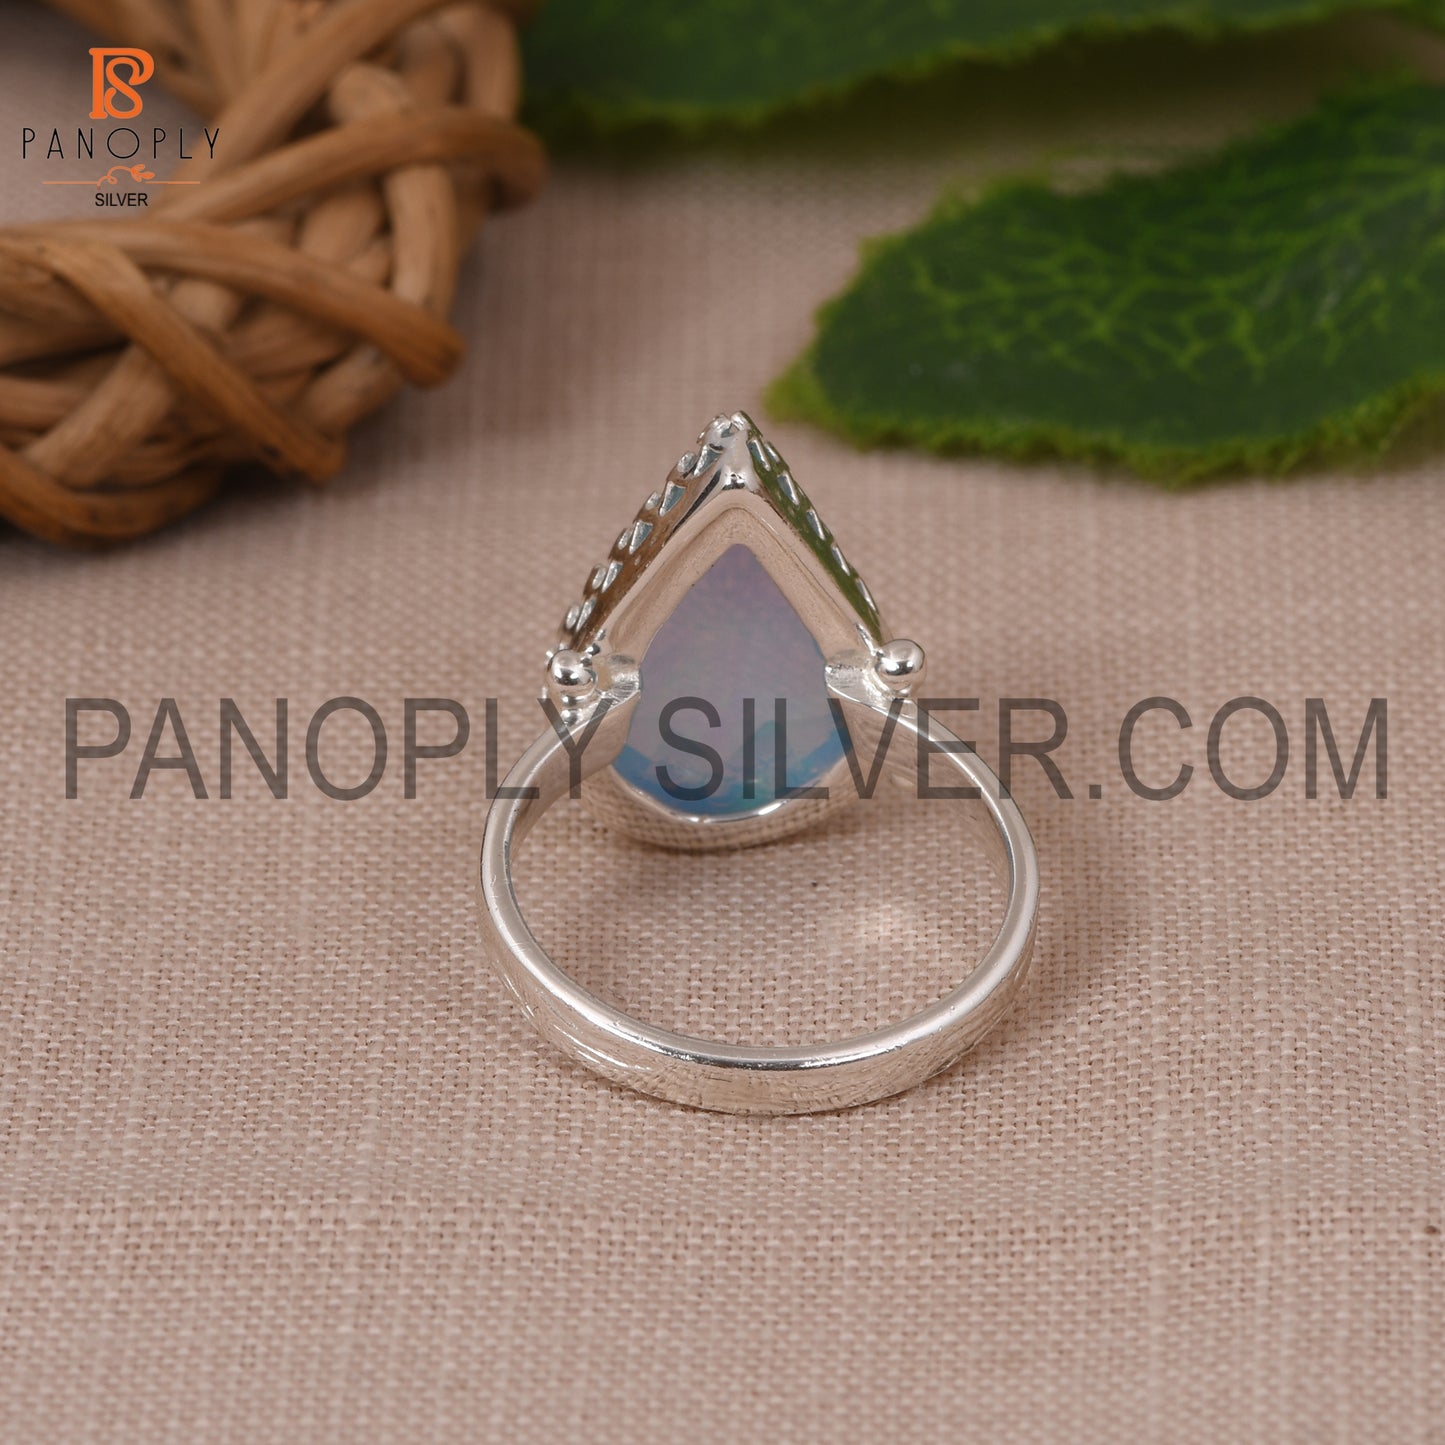 Beautiful Shining Stone 925 Silver Ring Gift for Mom